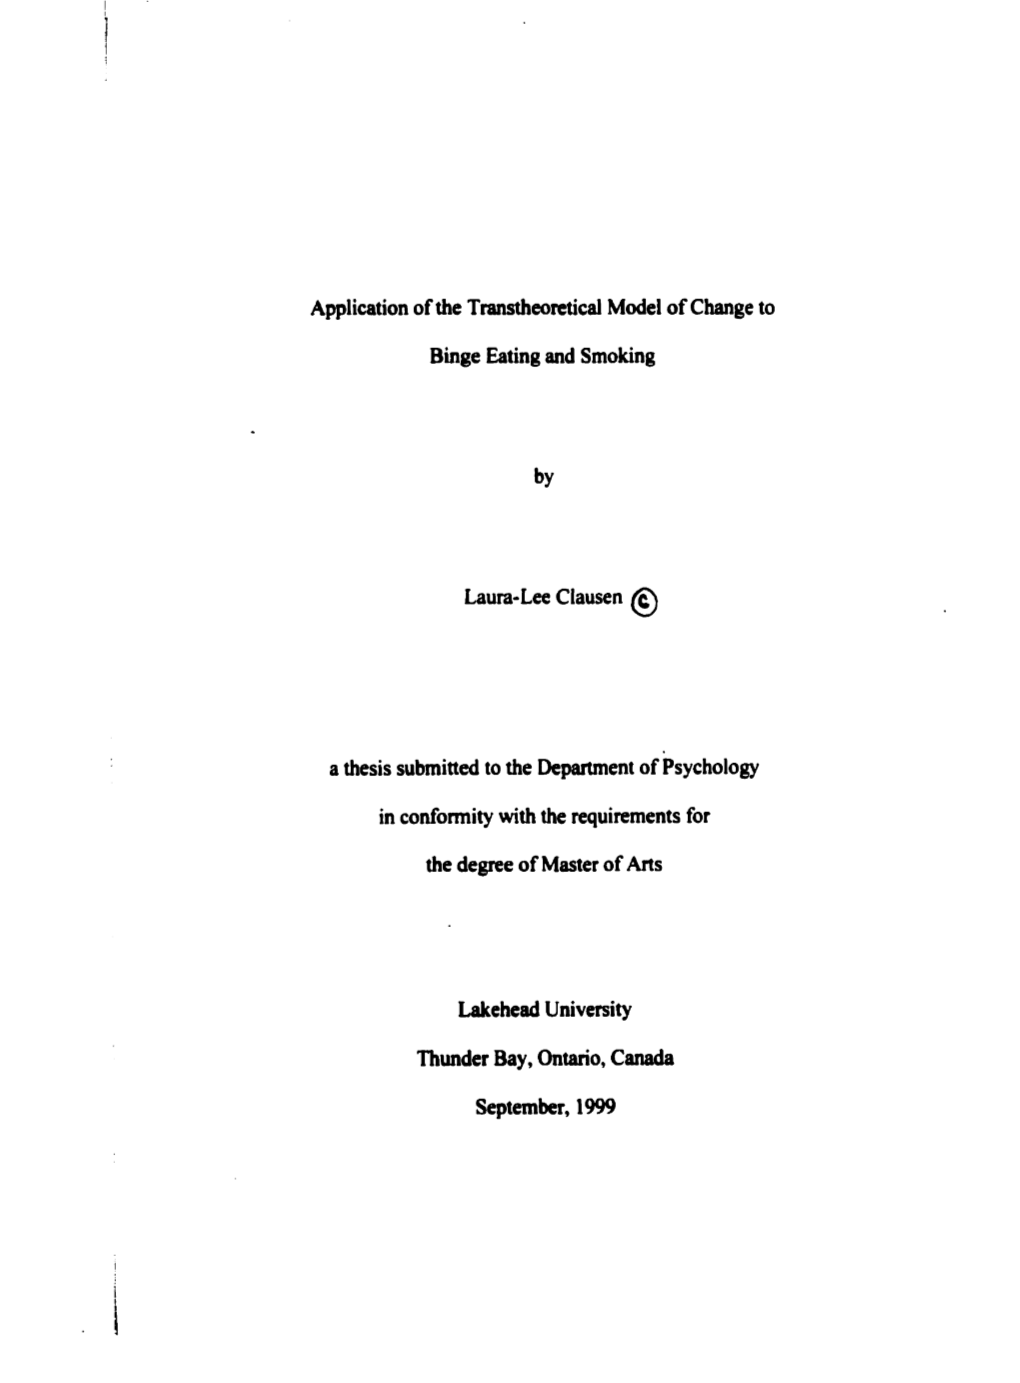 Application of the Transtheoretical Model of Change to Laura-Lee